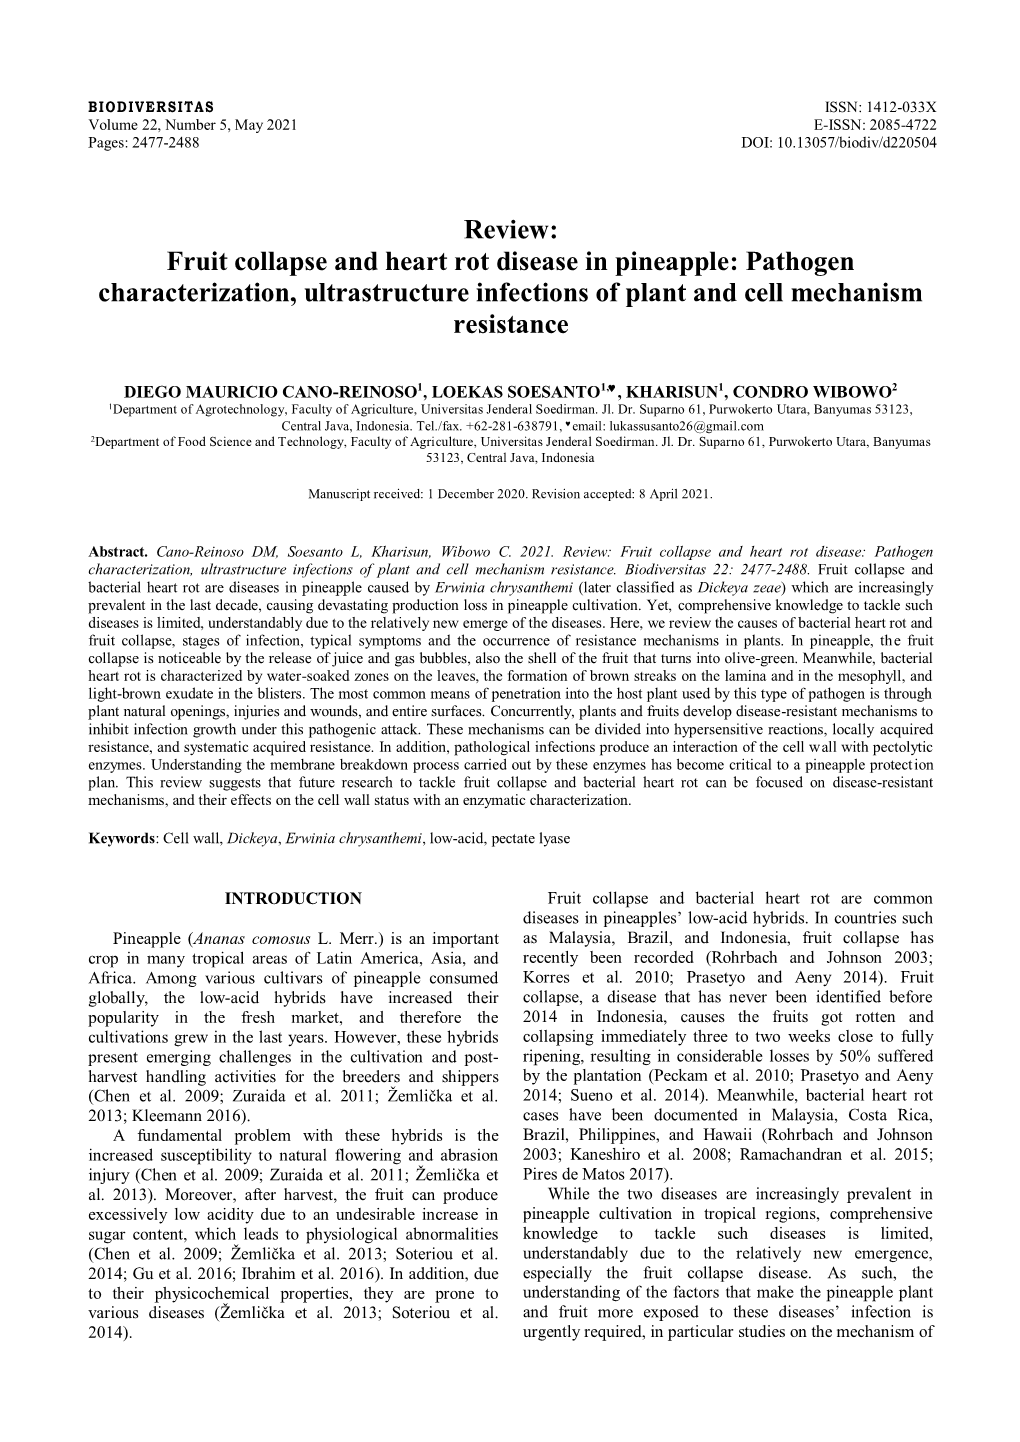 Review: Fruit Collapse and Heart Rot Disease in Pineapple: Pathogen Characterization, Ultrastructure Infections of Plant and Cell Mechanism Resistance